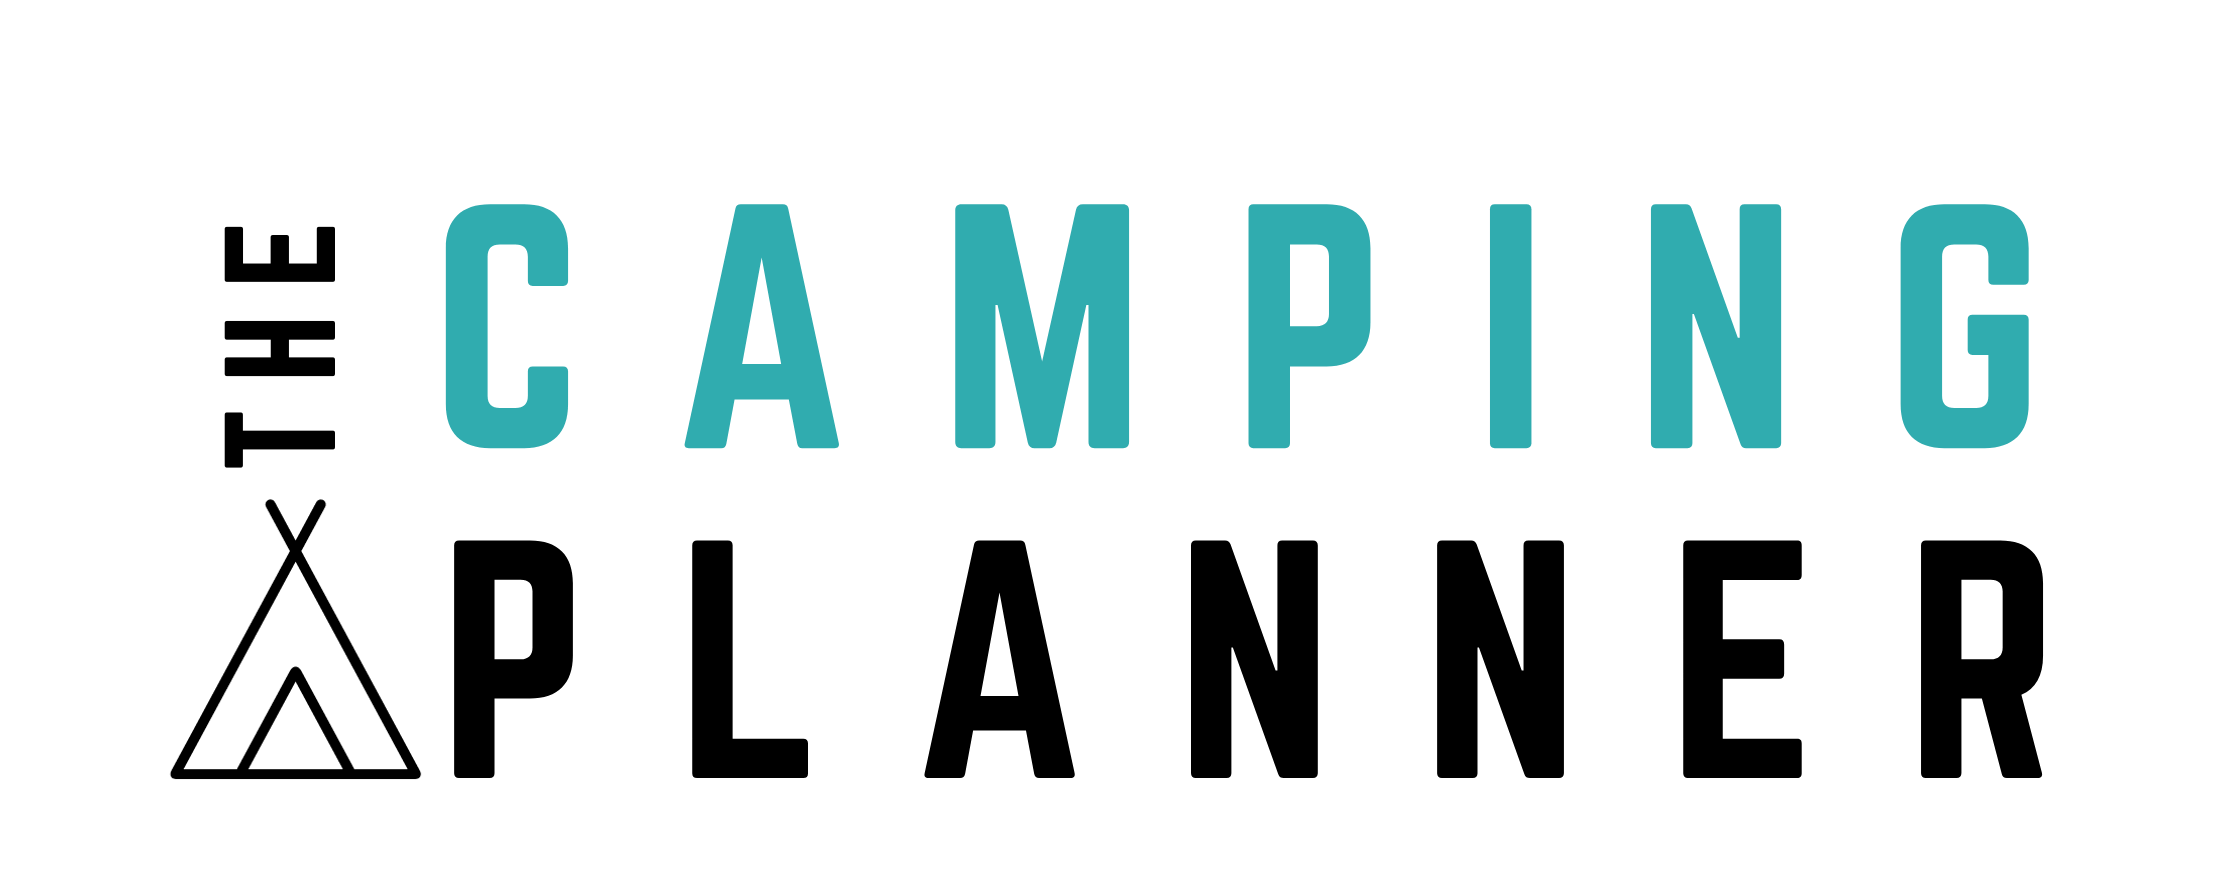 the camping planner logo.